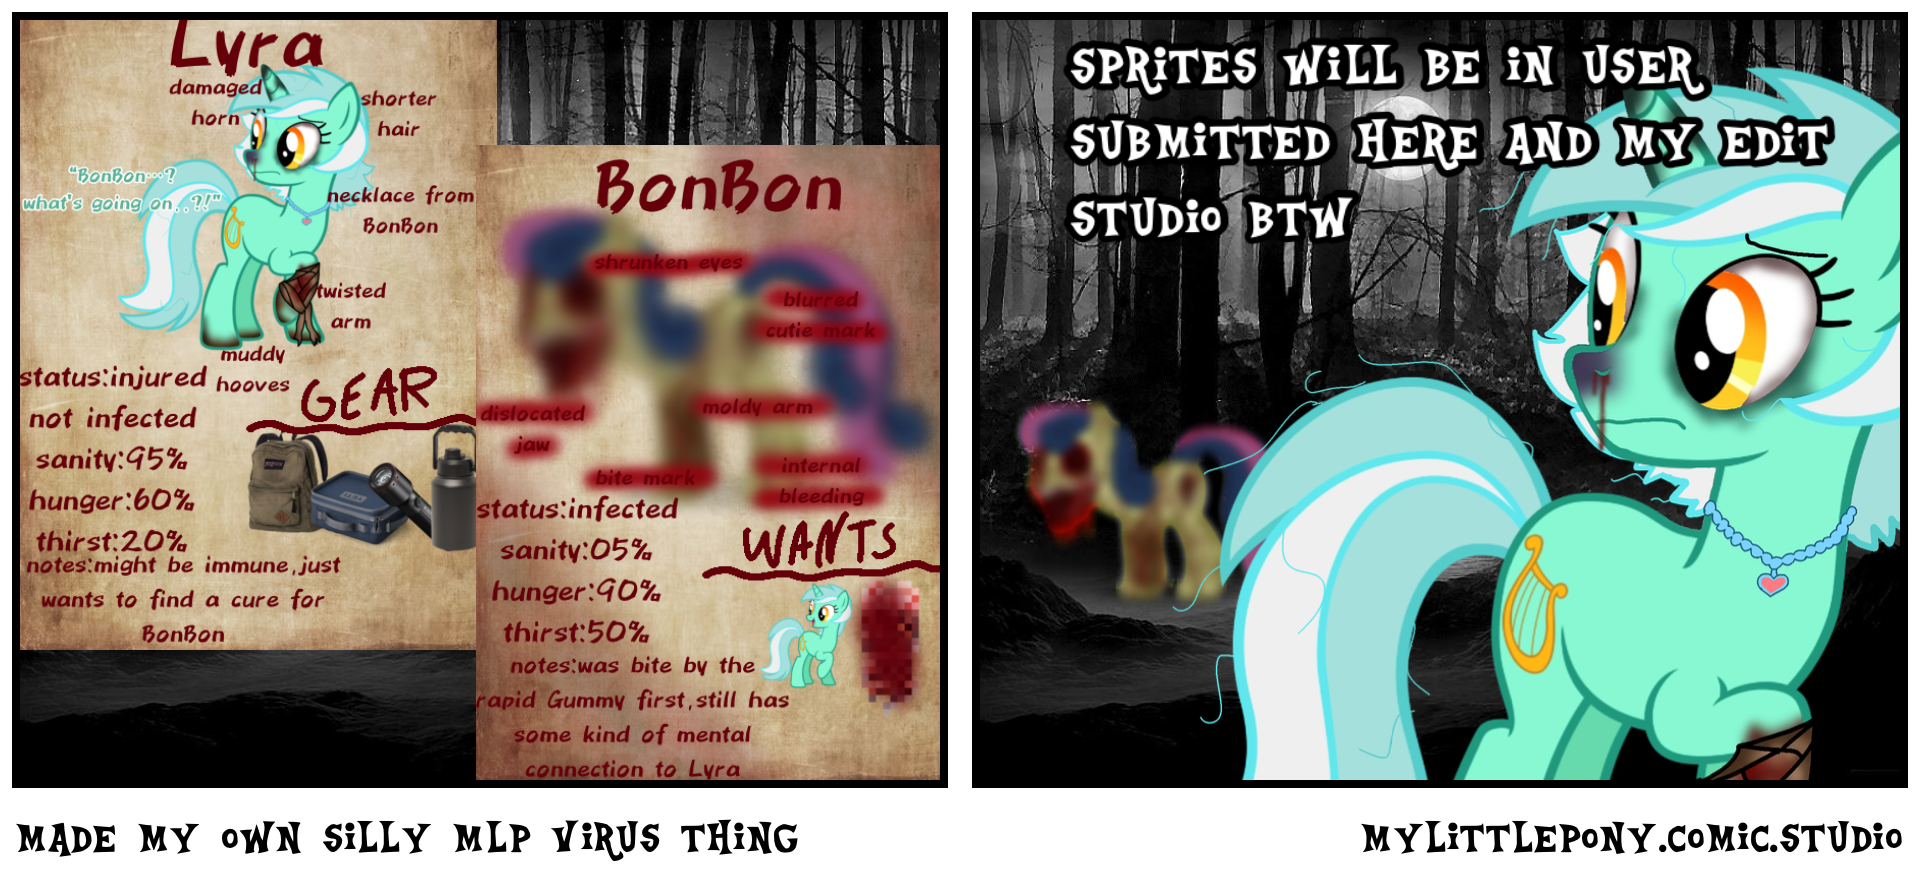 made my own silly mlp virus thing